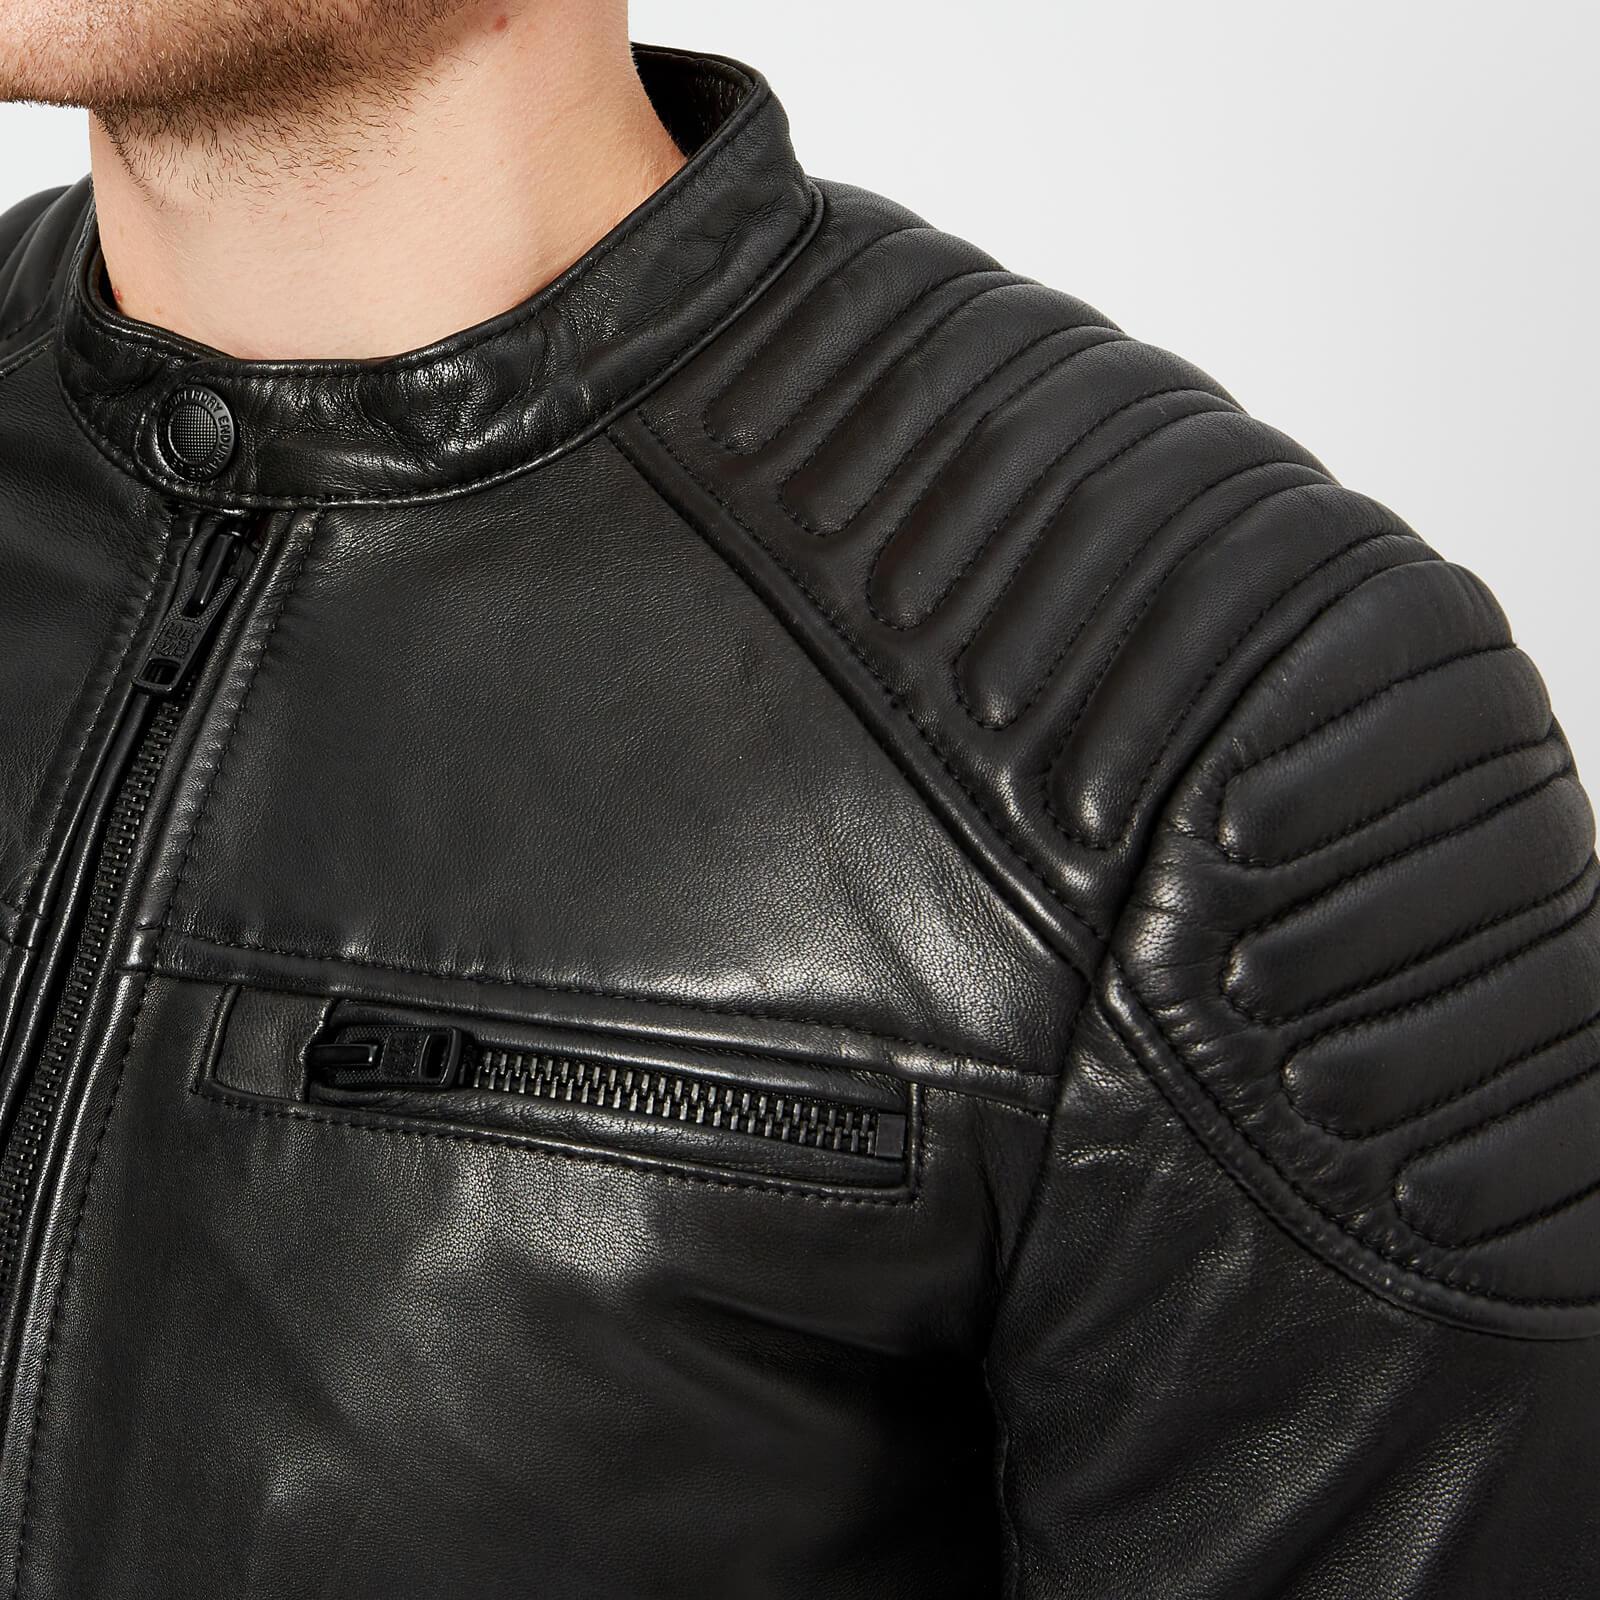 Superdry New Hero Leather Jacket in Black for Men | Lyst